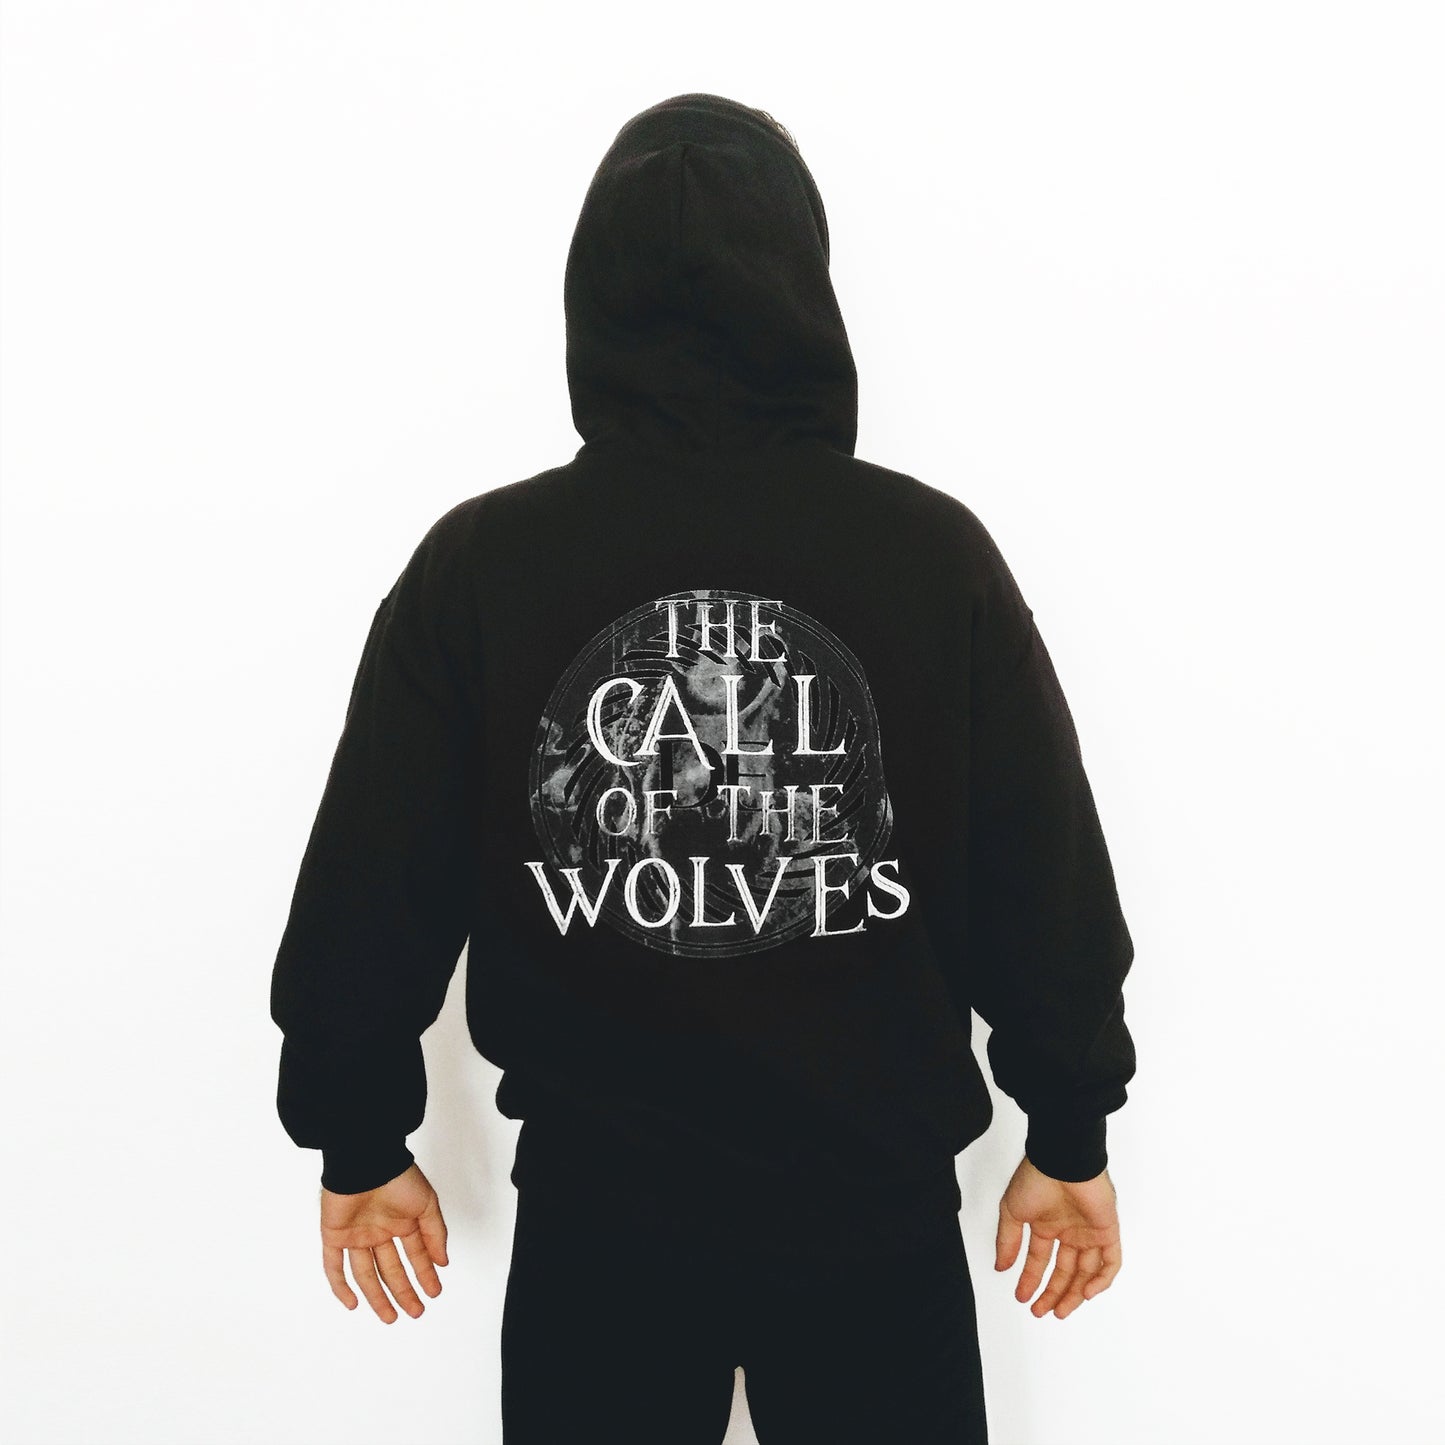 The Call Of The Wolves hoodie